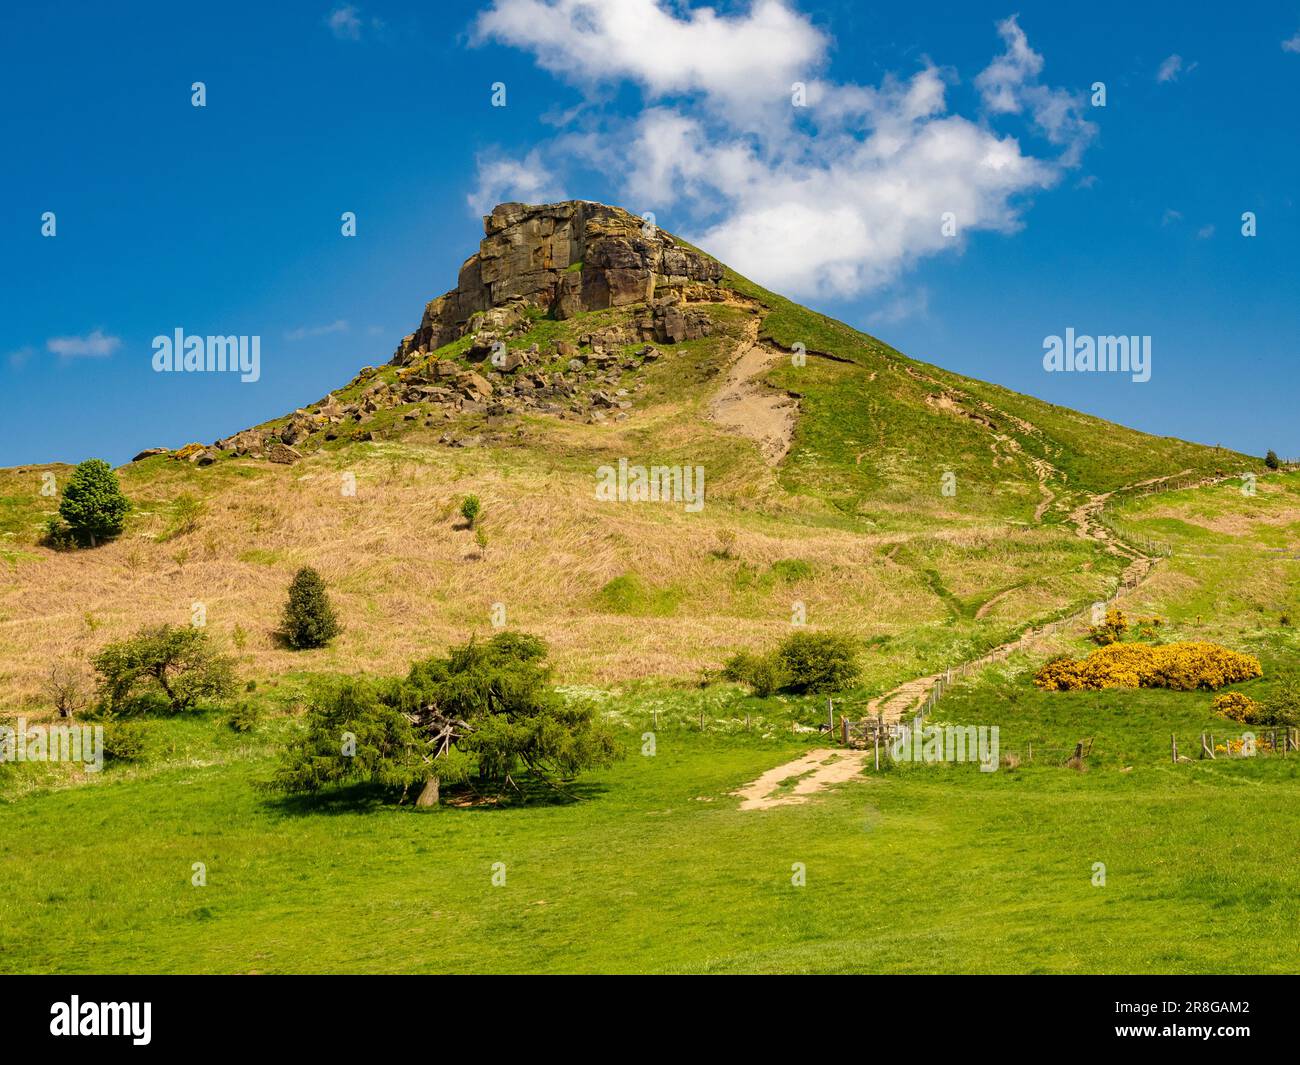 The iconic shape of Roseberry Topping seen with an old coniferous tree in the foreground. Stock Photo